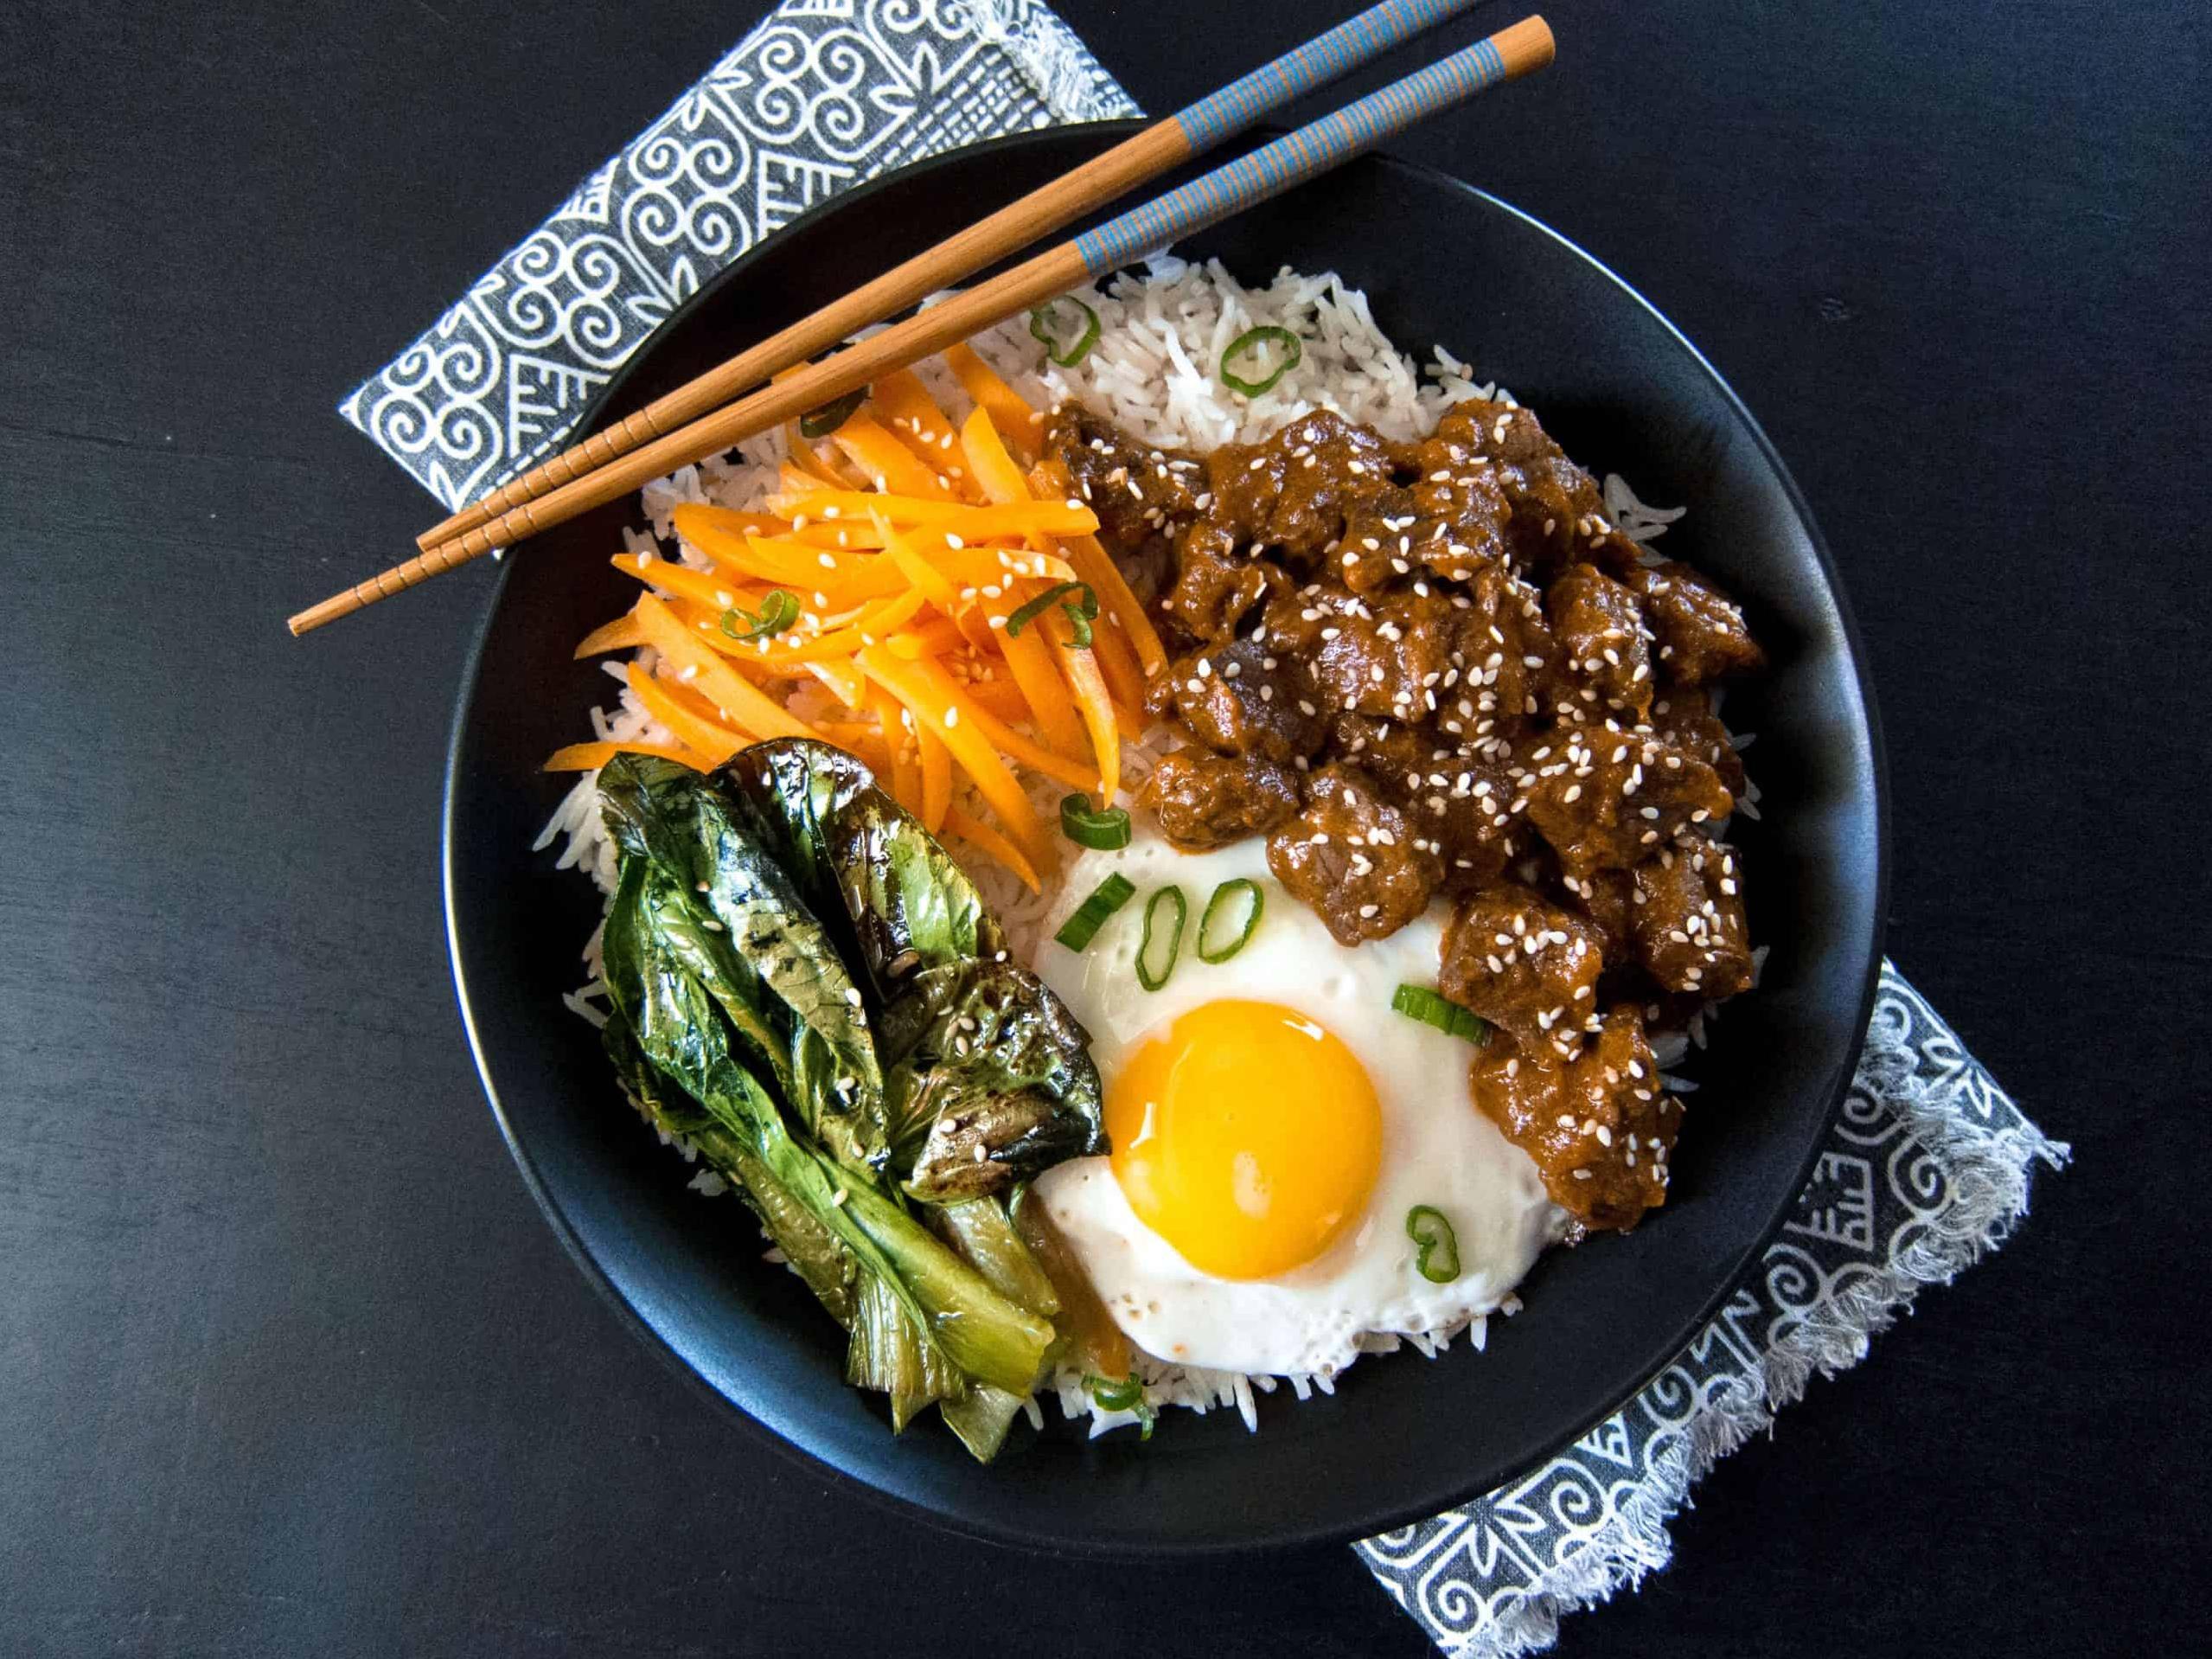  Who knew cooking bibimbap could be this easy and quick with the Instant Pot?